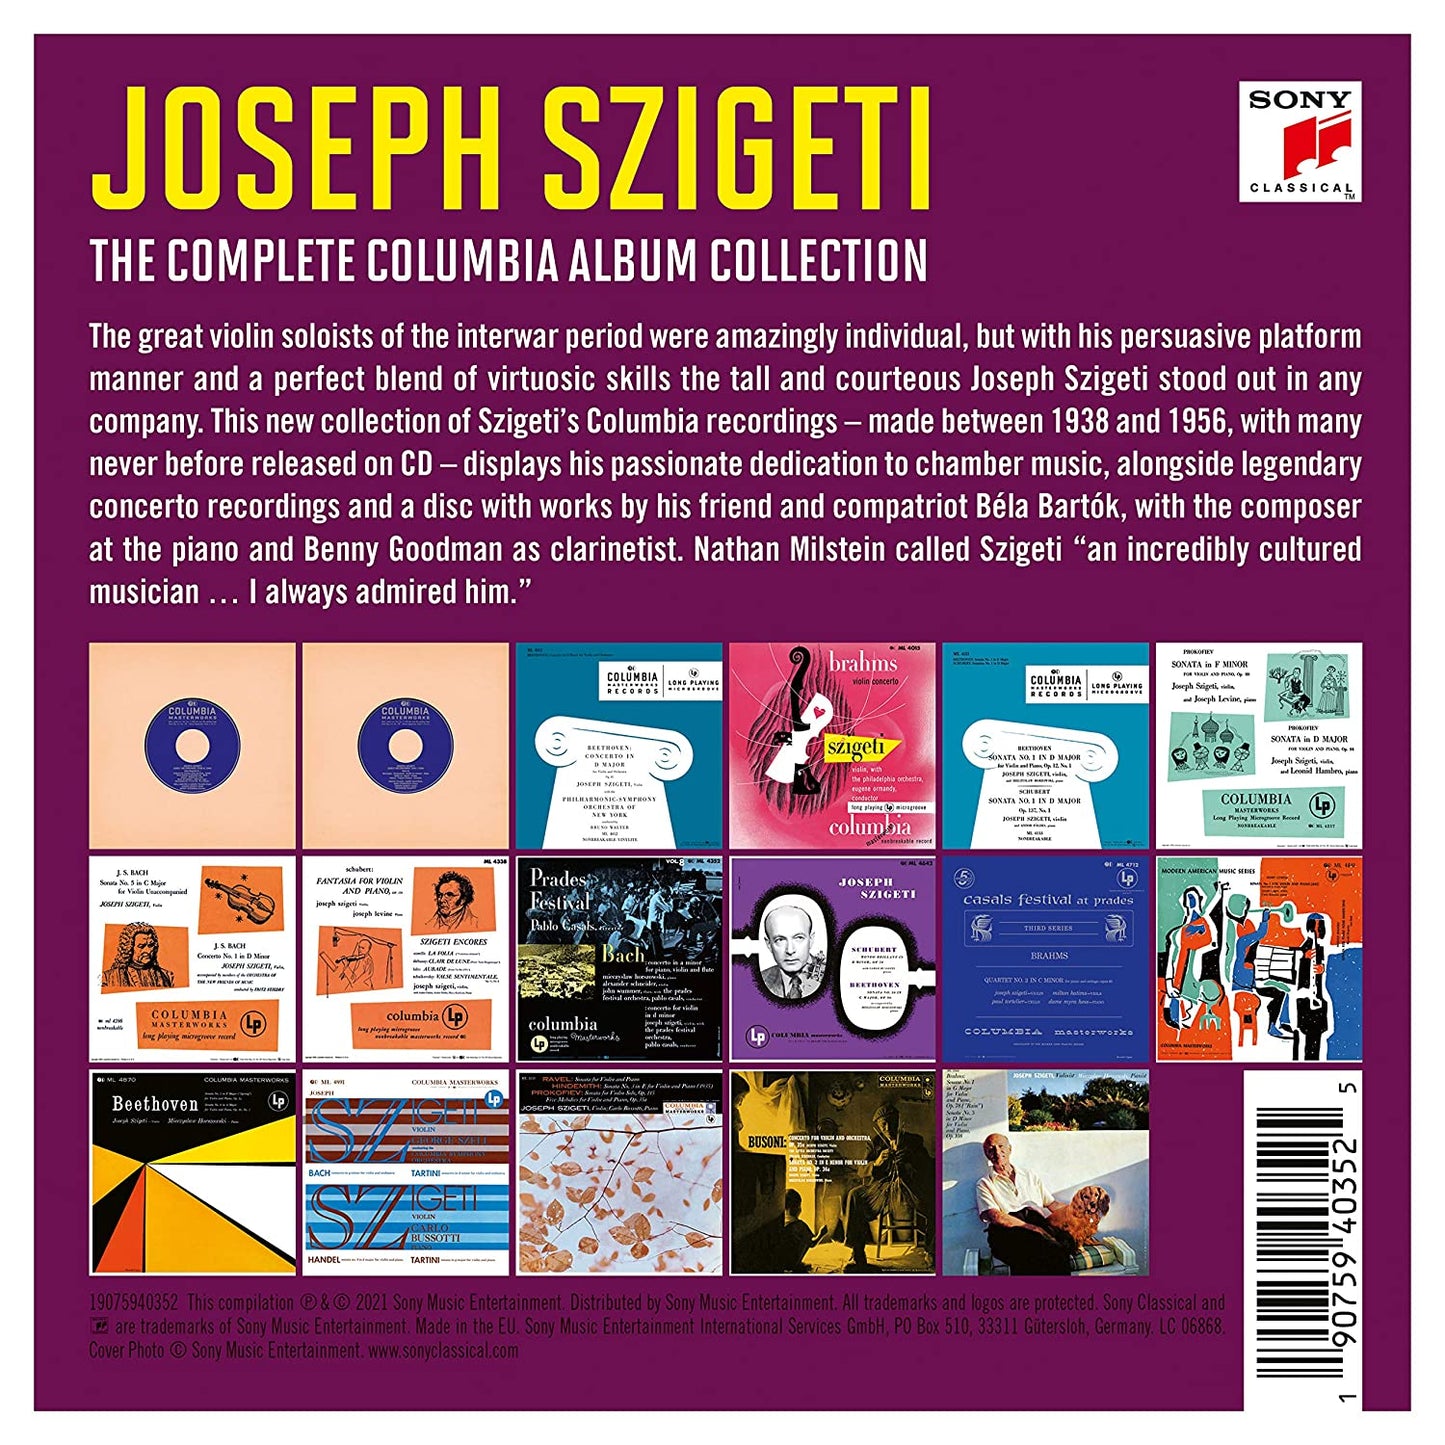 JOSEPH SZIGETI: THE COMPLETE COLUMBIA ALBUMS COLLECTION (17 CDs)